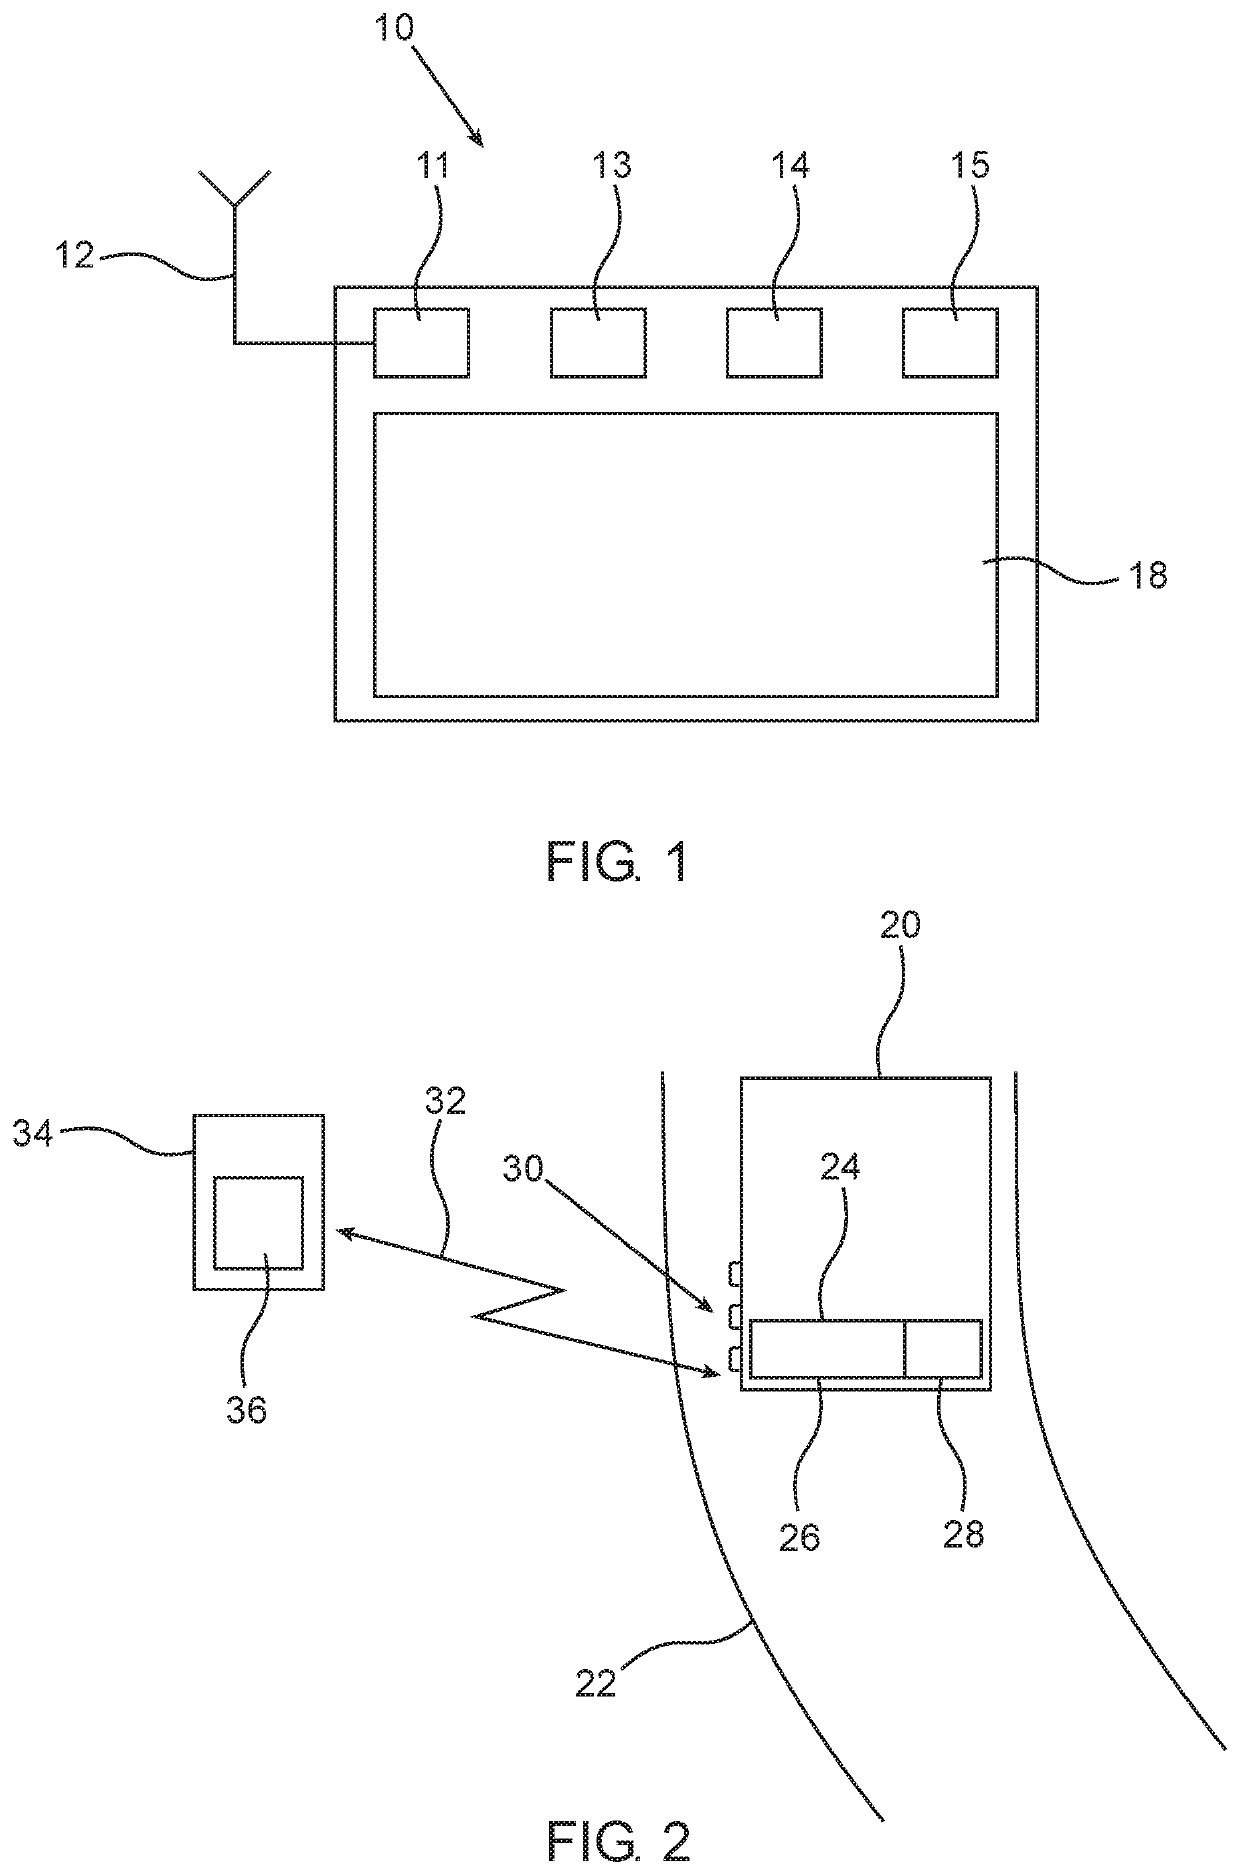 System and method for locating, finding and anti-theft protecting an object of interest